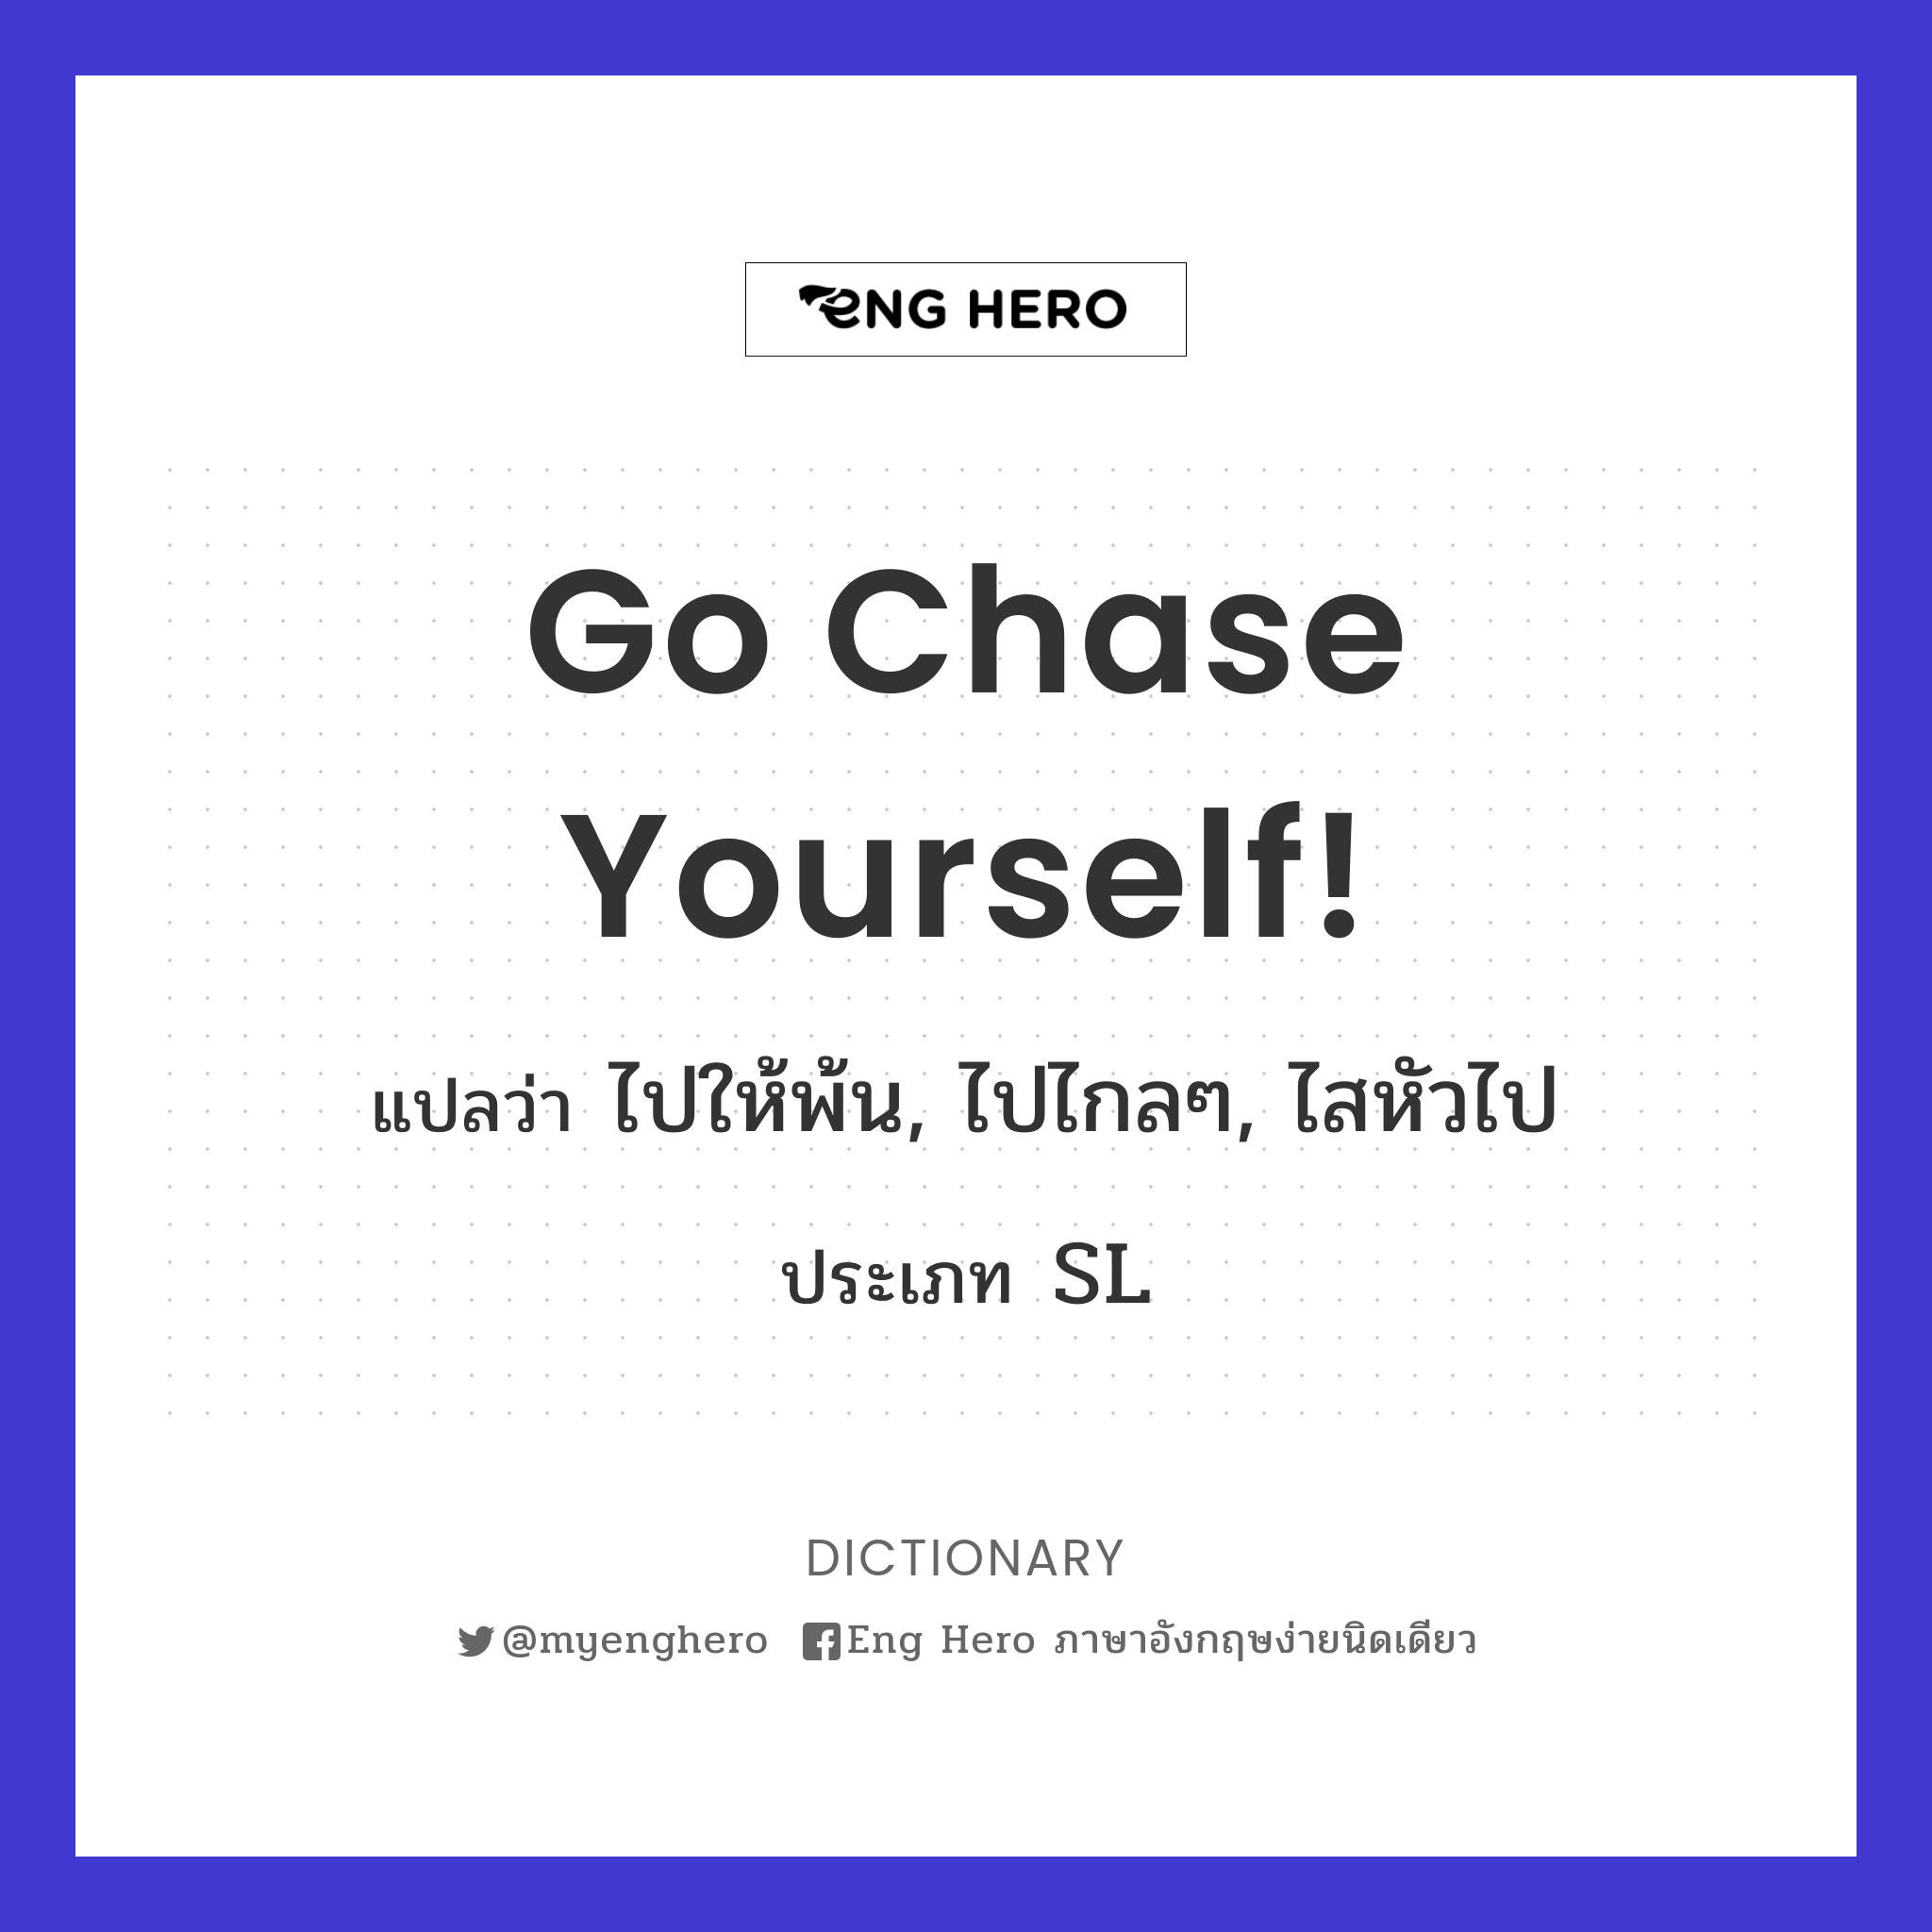 Go chase yourself!